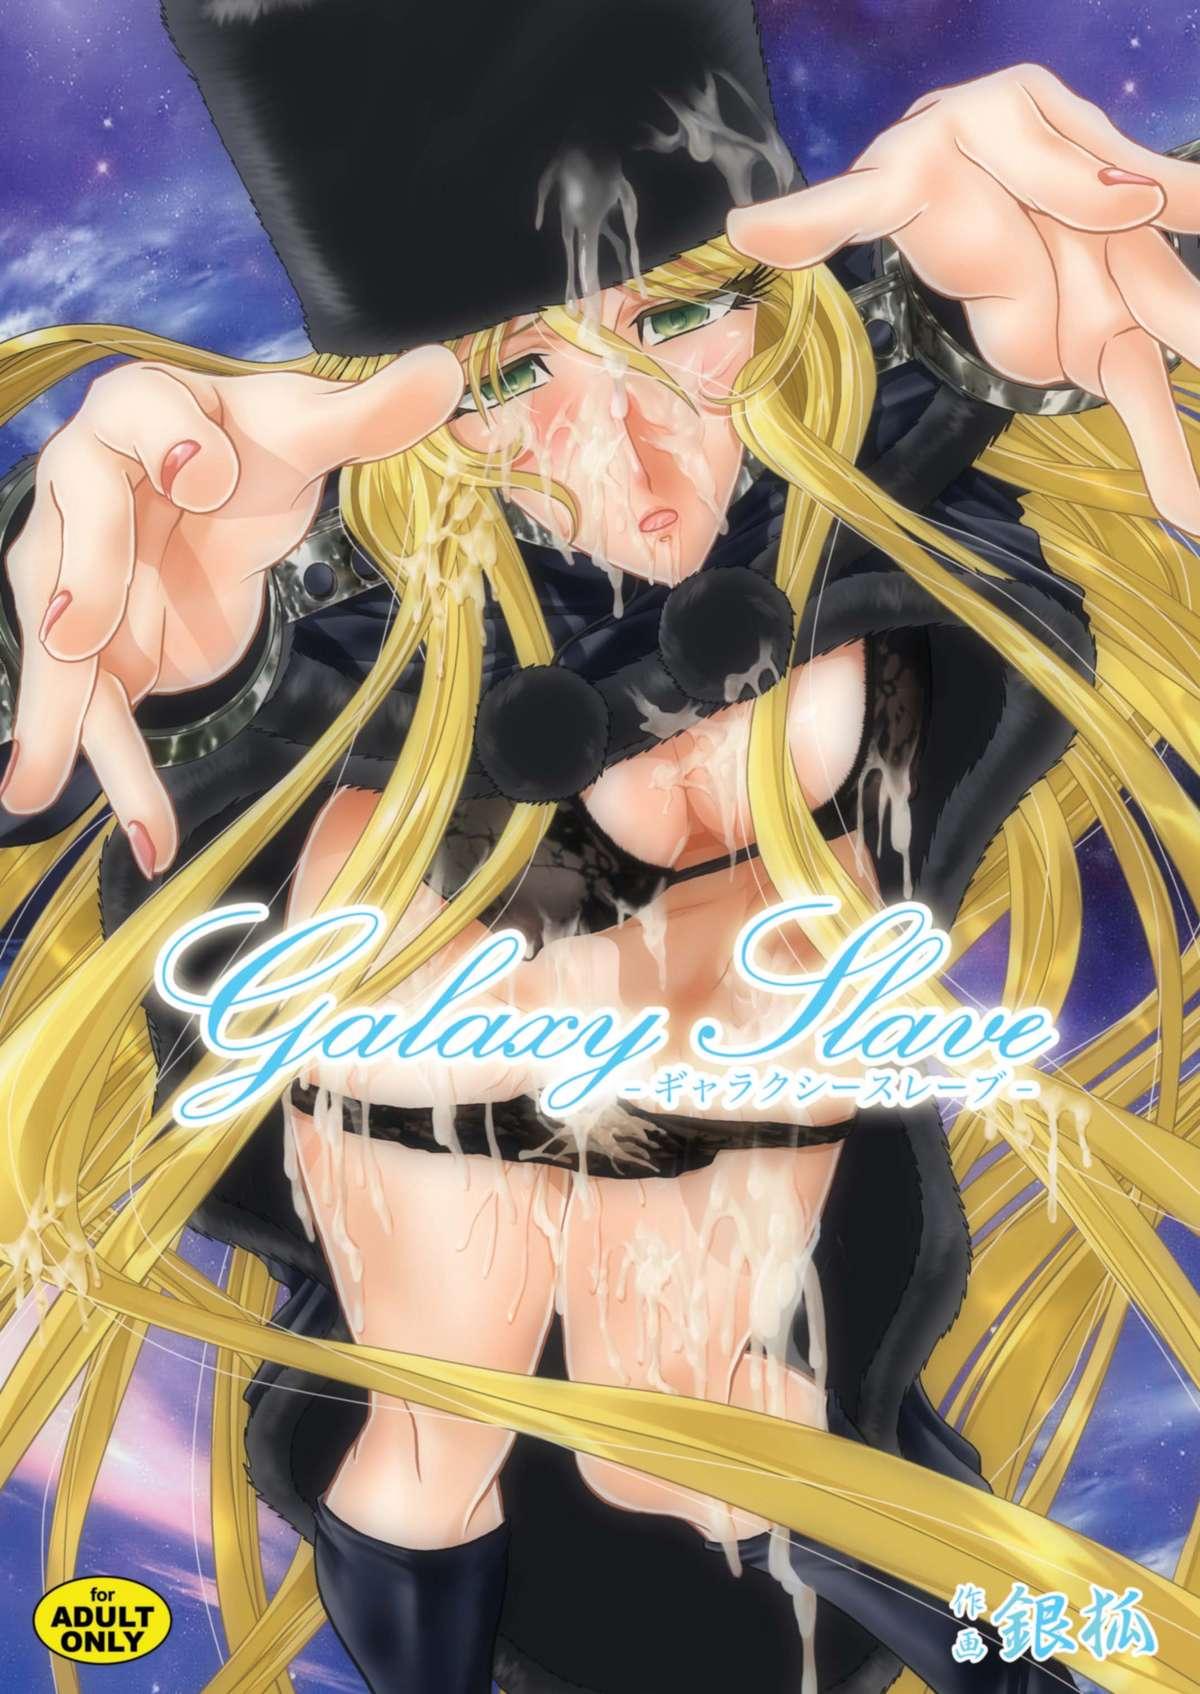 Free Porn Hardcore Galaxy Slave - Galaxy express 999 Gays - Picture 1